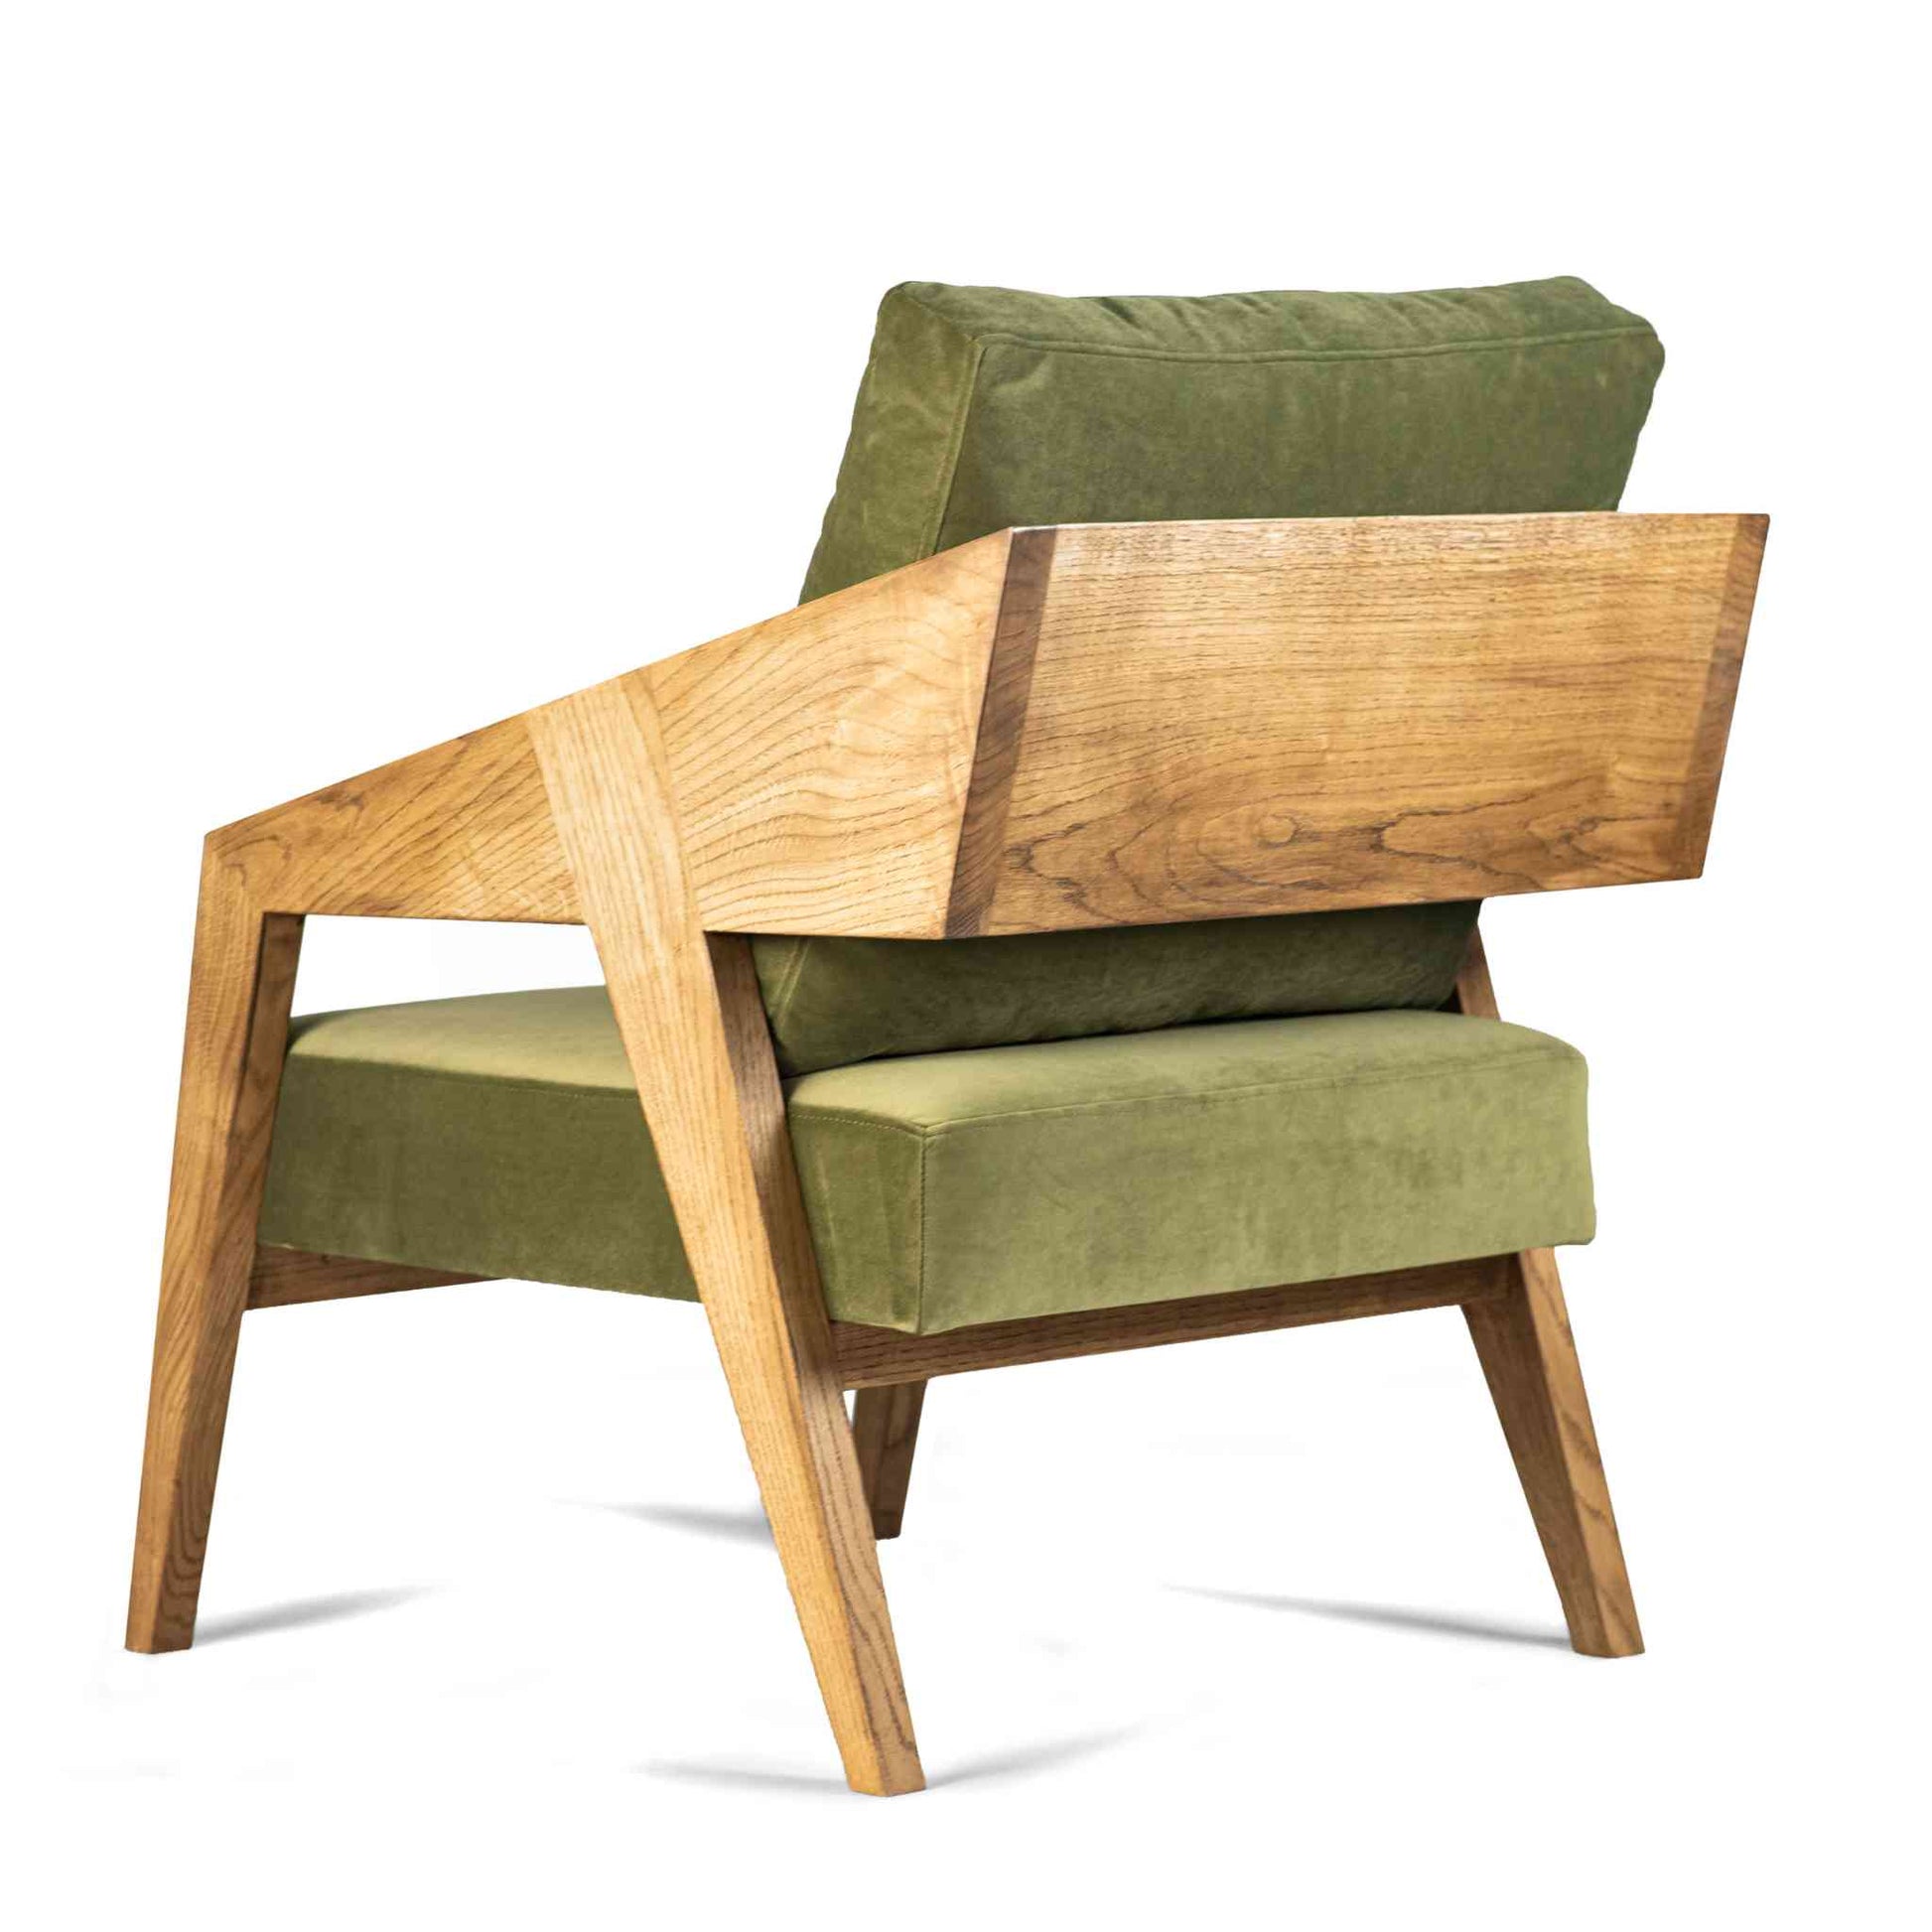 ÉTAUDORÉ Parsenn Armchair in solid oak wood with high quality olive green color upholstery - back view